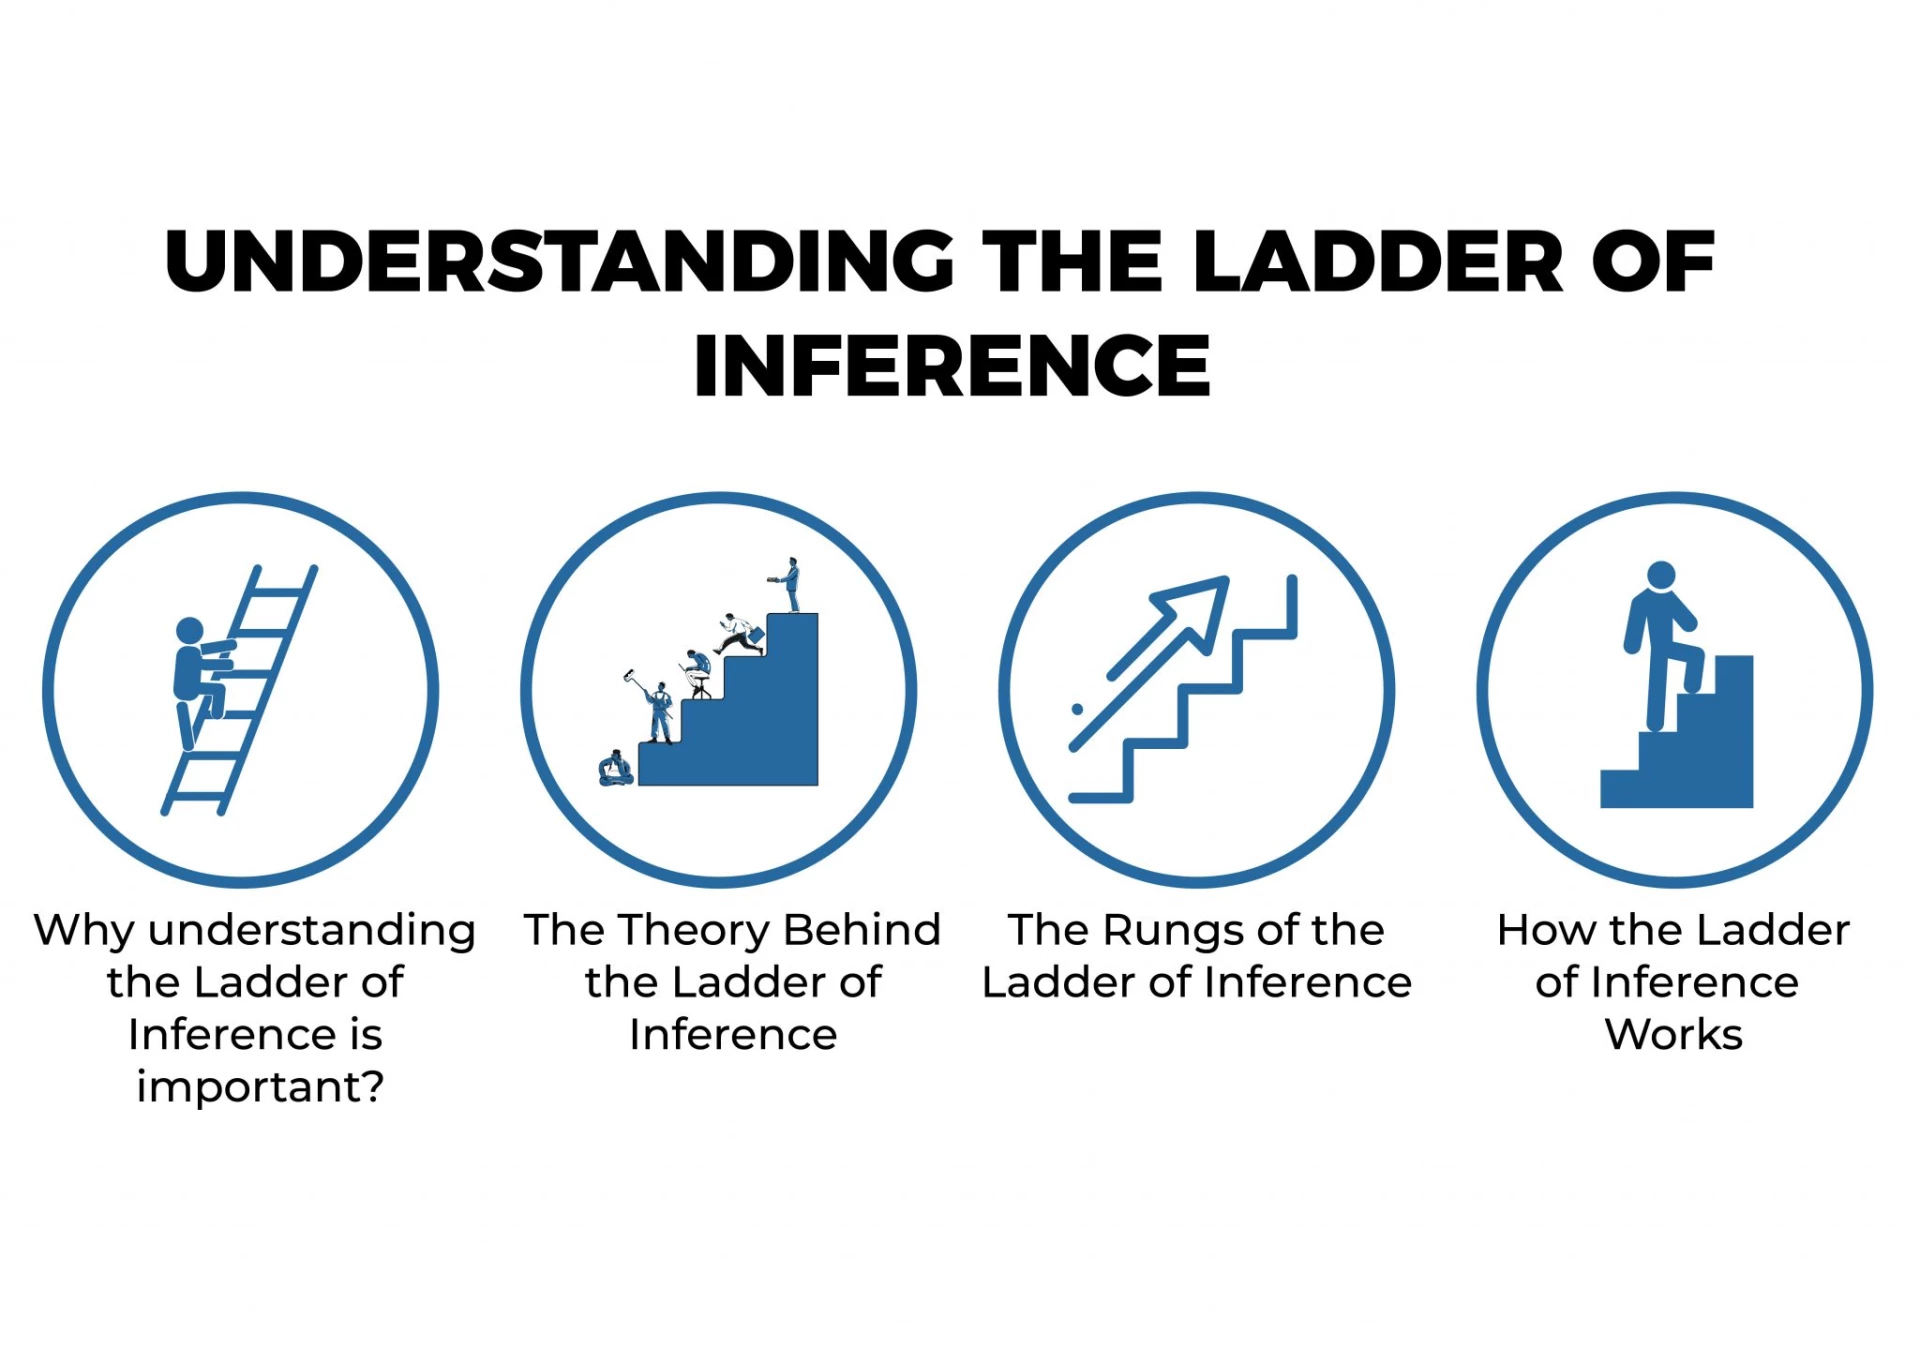 UNDERSTANDING THE LADDER OF INFERENCE